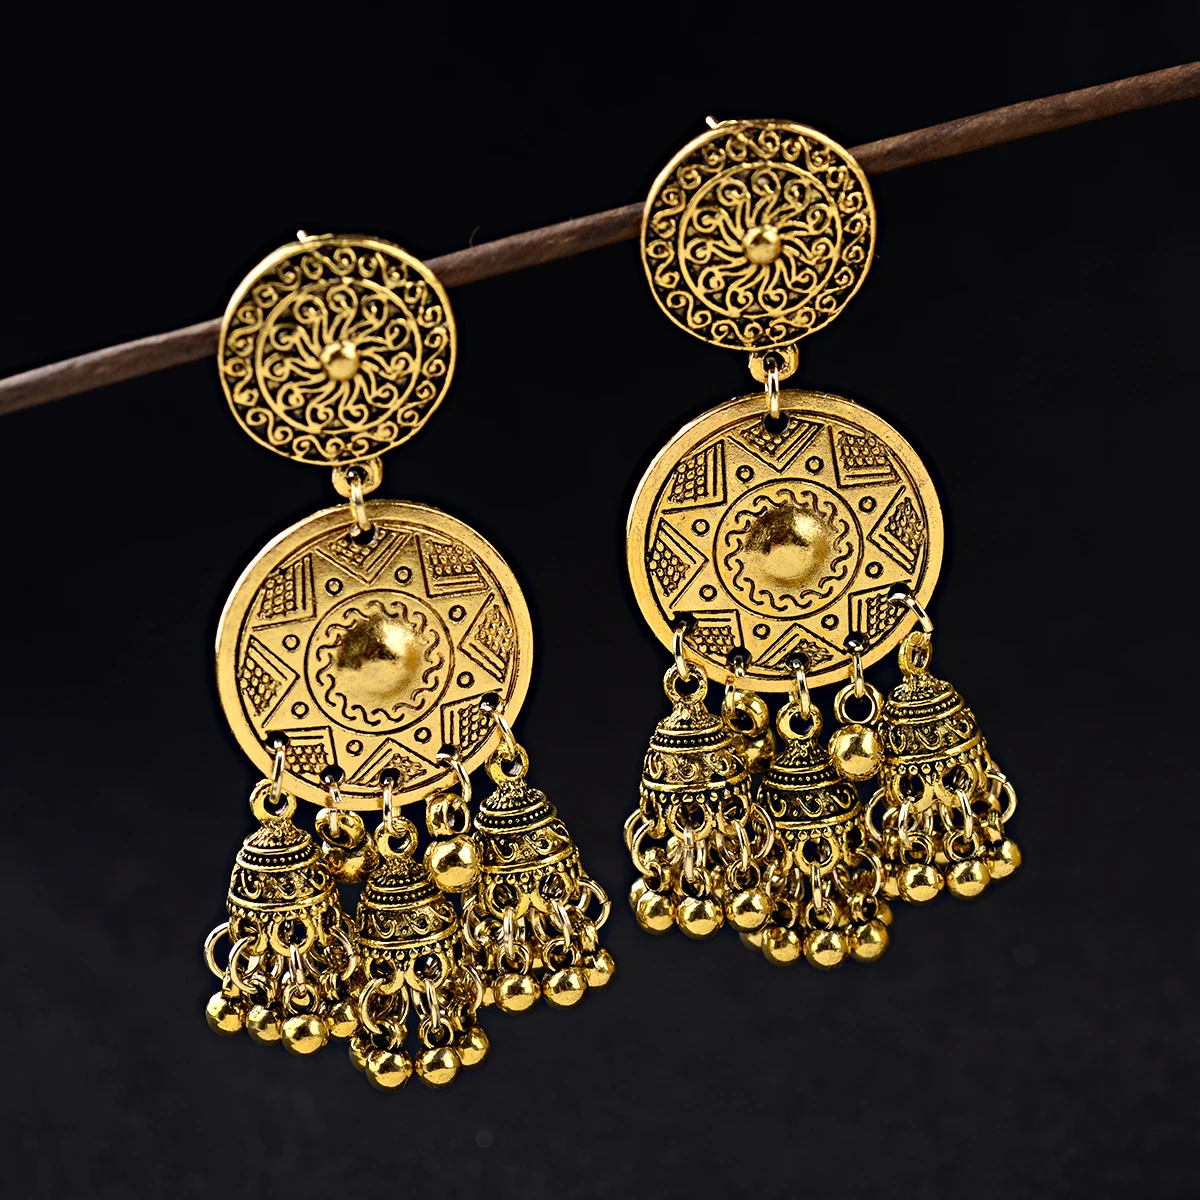 

Boho Vintage Jhumka Statement Big Bells Tassel Drop Earrings for Women Ethnic Round Carved Brincos Gypsy Indian Jewelry, Gold/silver